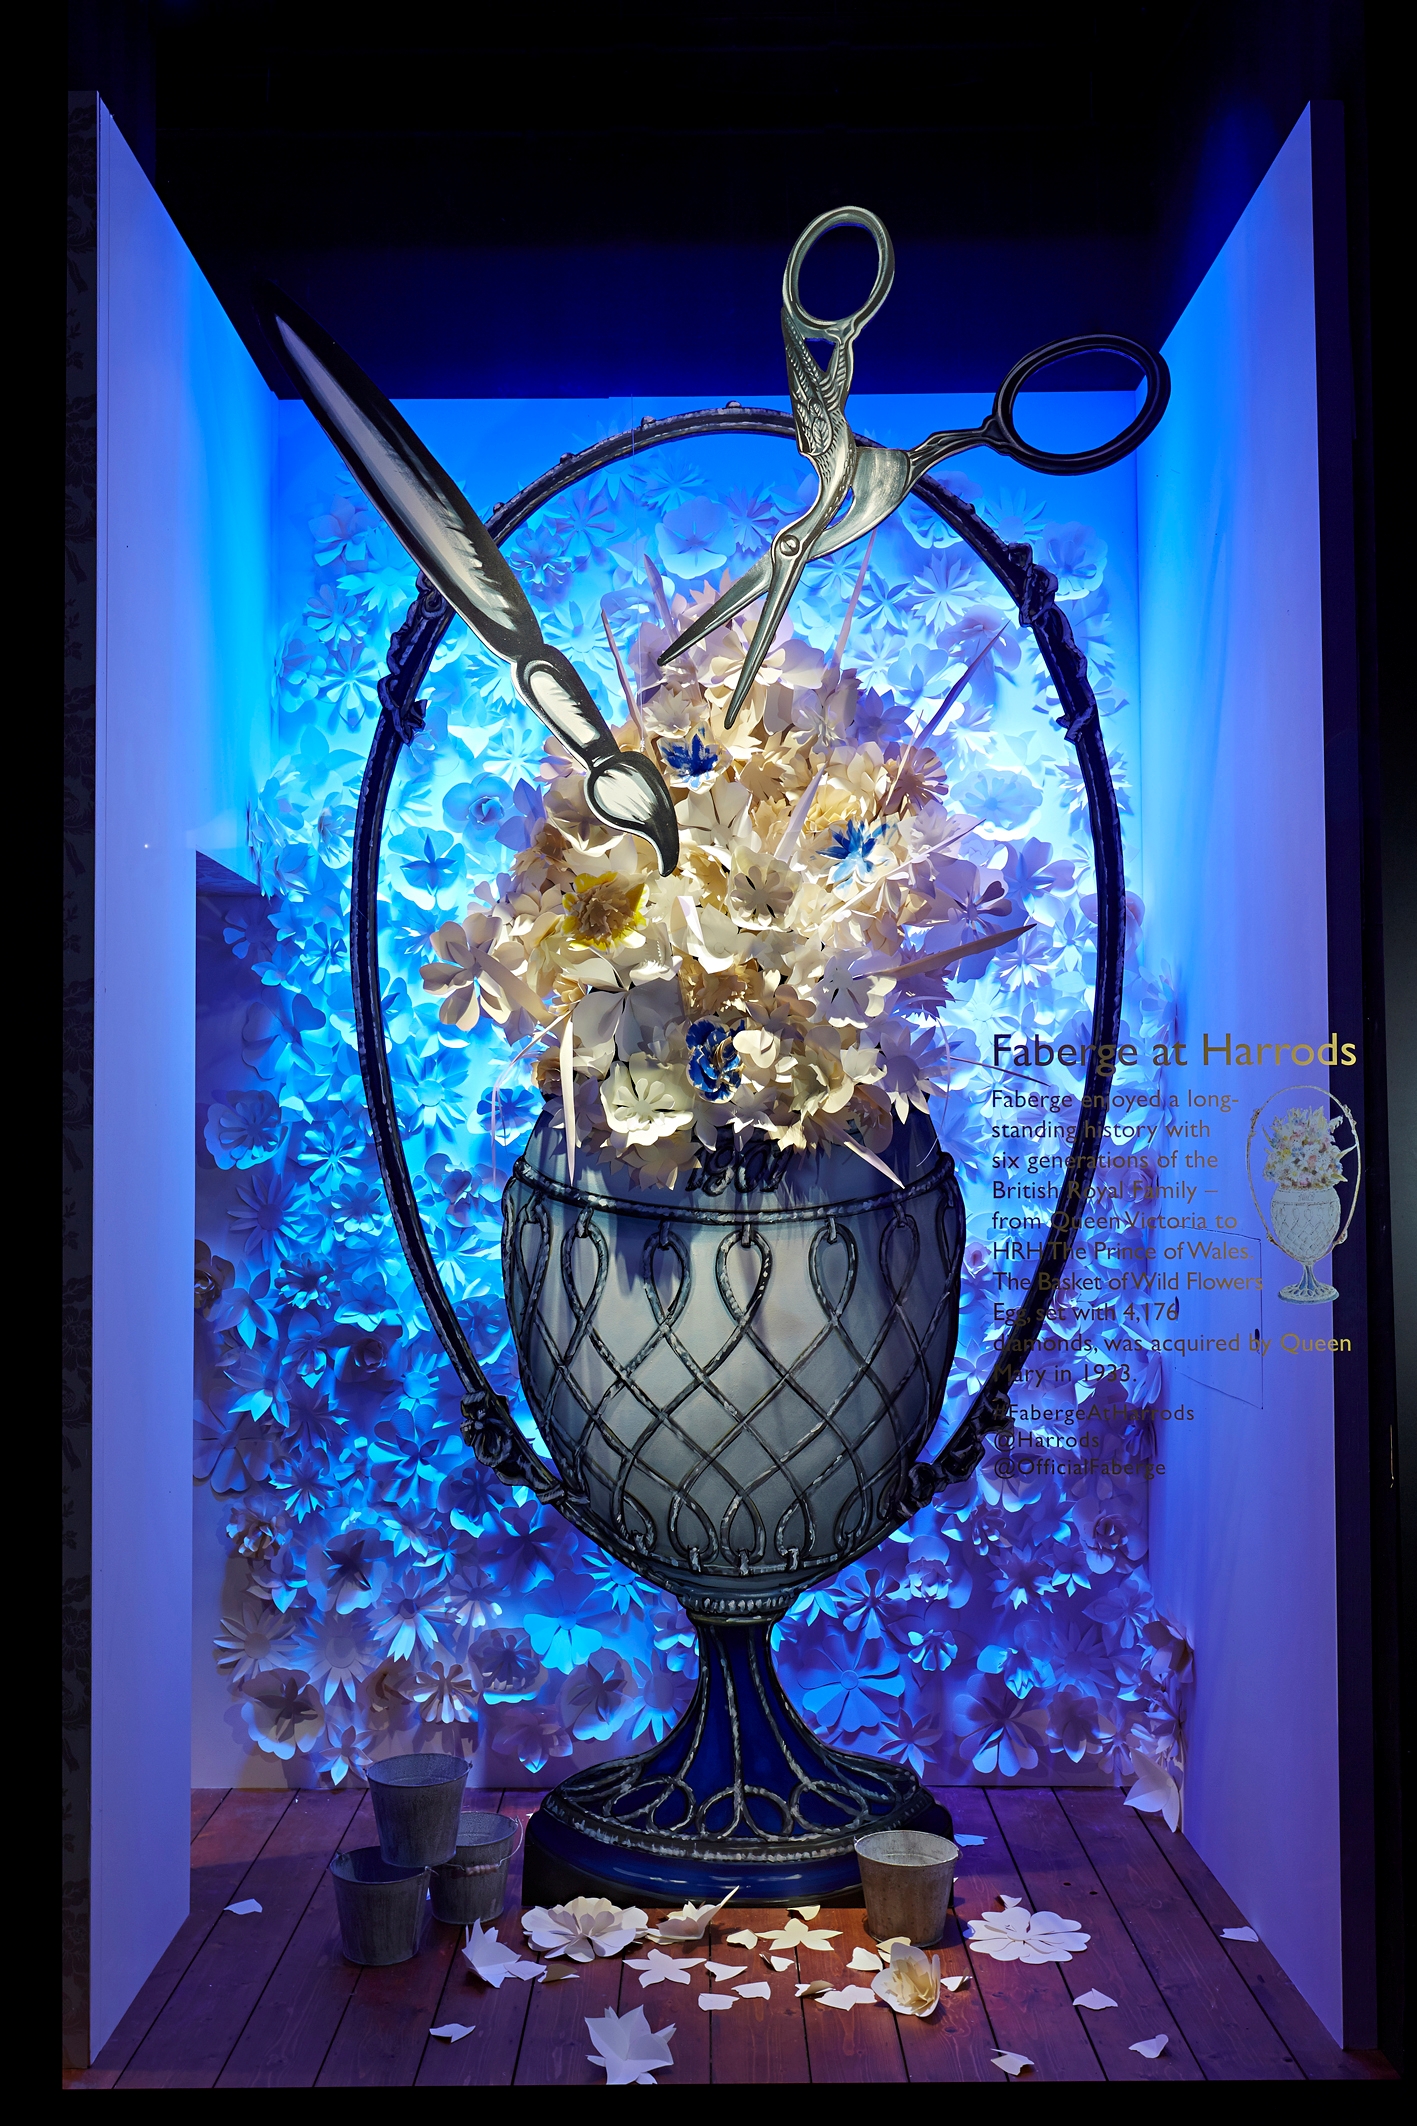 Faberge window at Harrods.